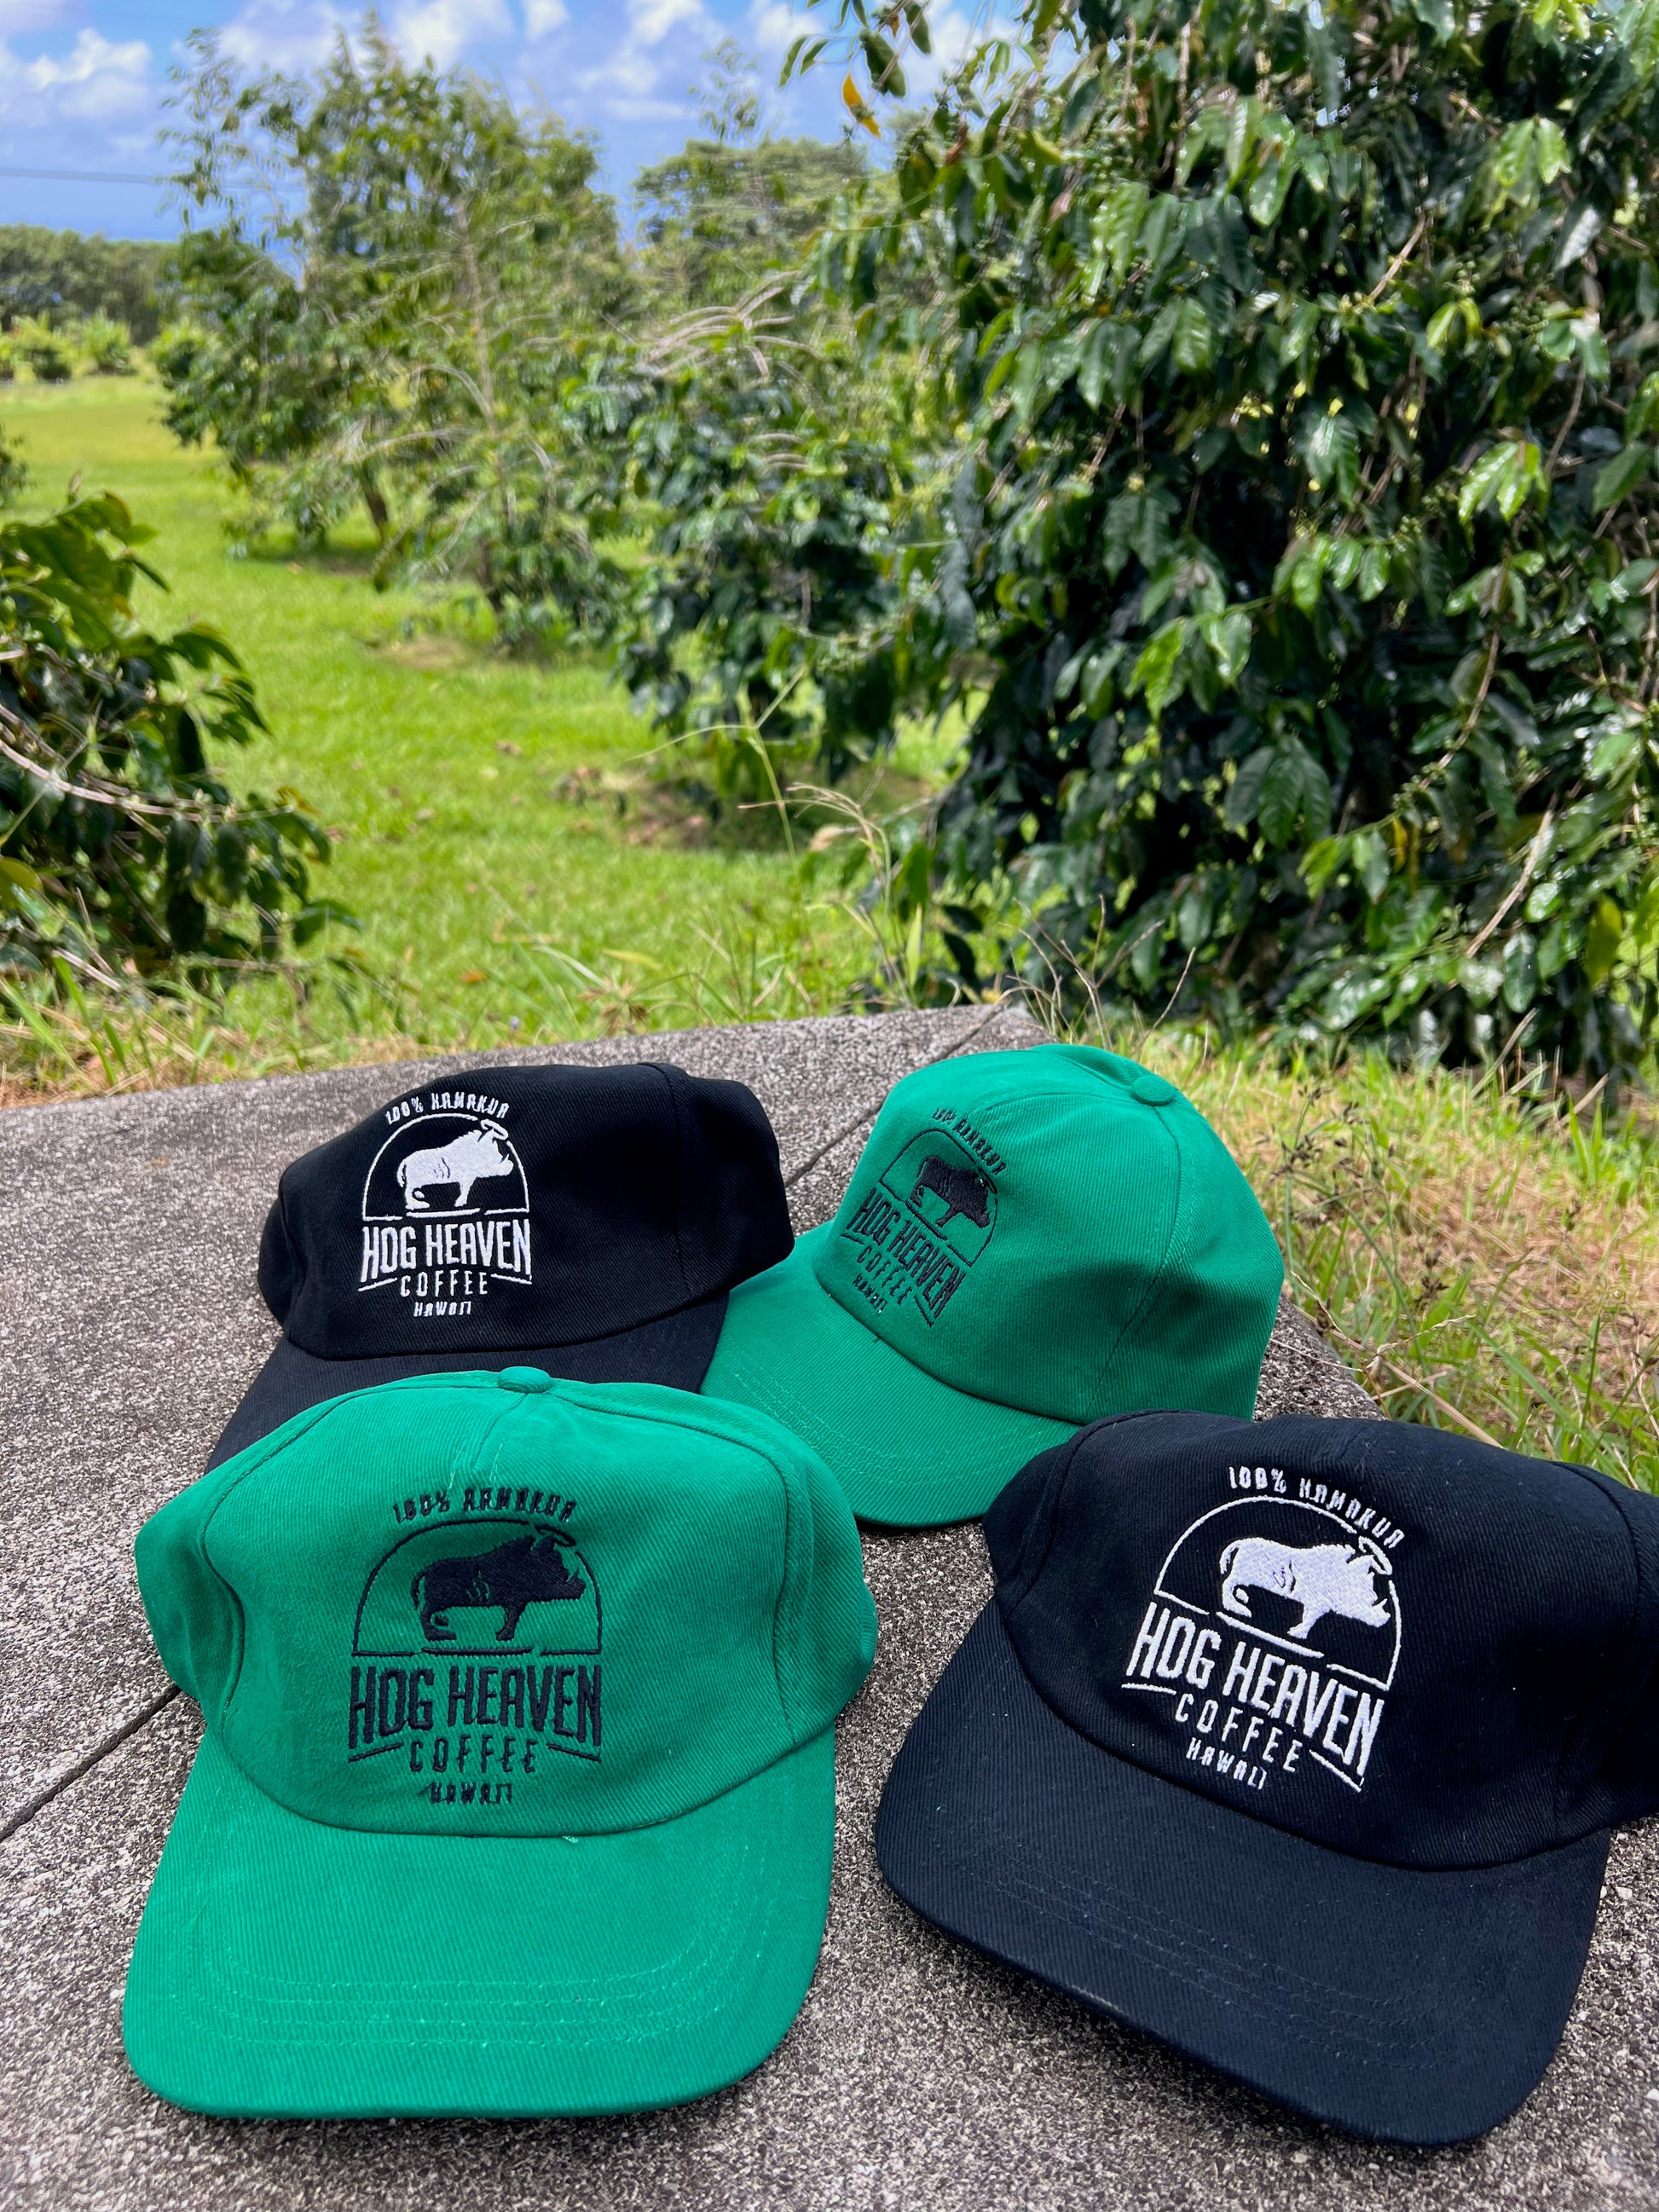 green and black color hog heaven coffee hats next to coffee trees